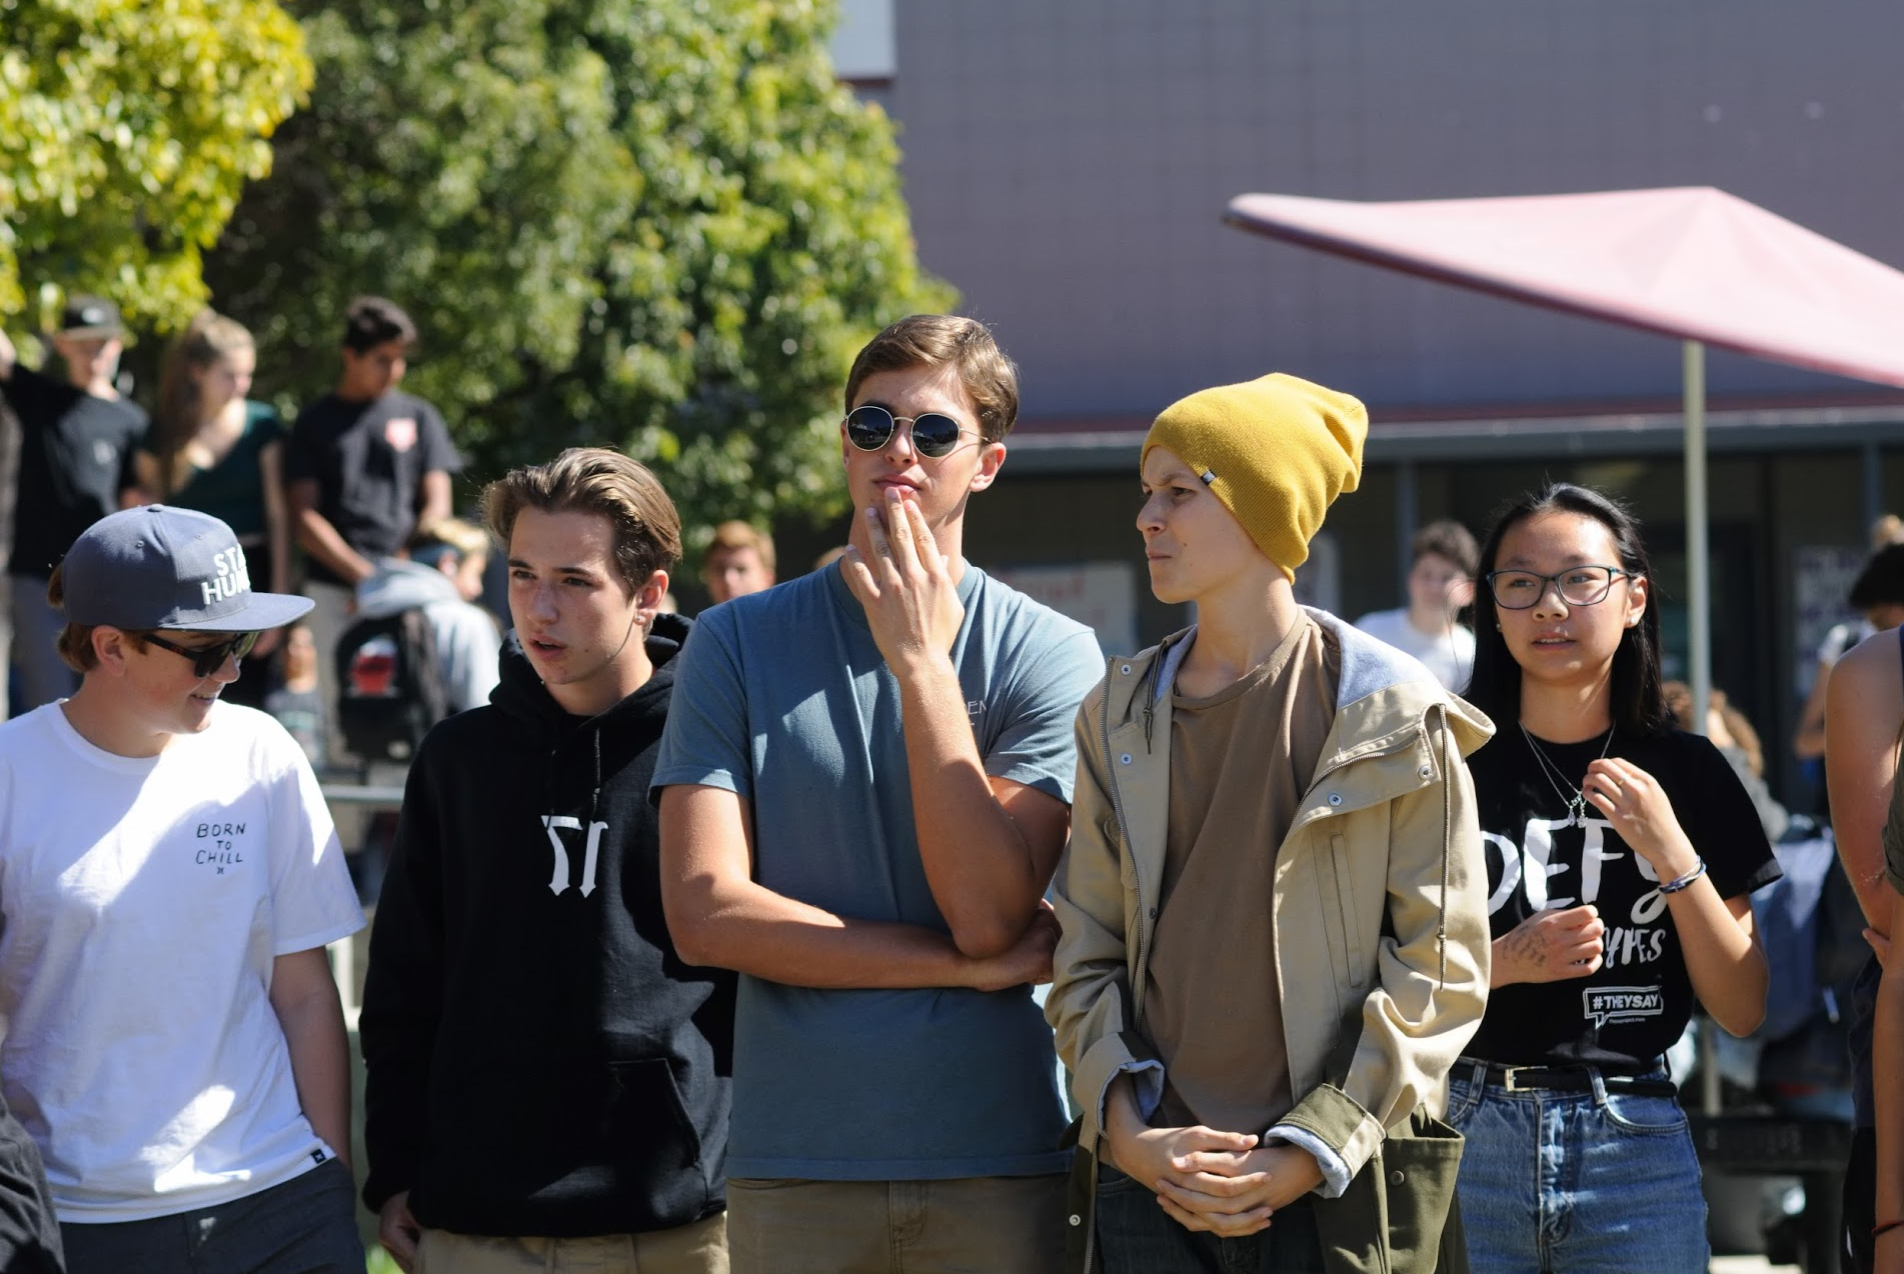 Students listen intently to what WE club has to say. Credit: Muriel Rowley / The Foothill Dragon Press